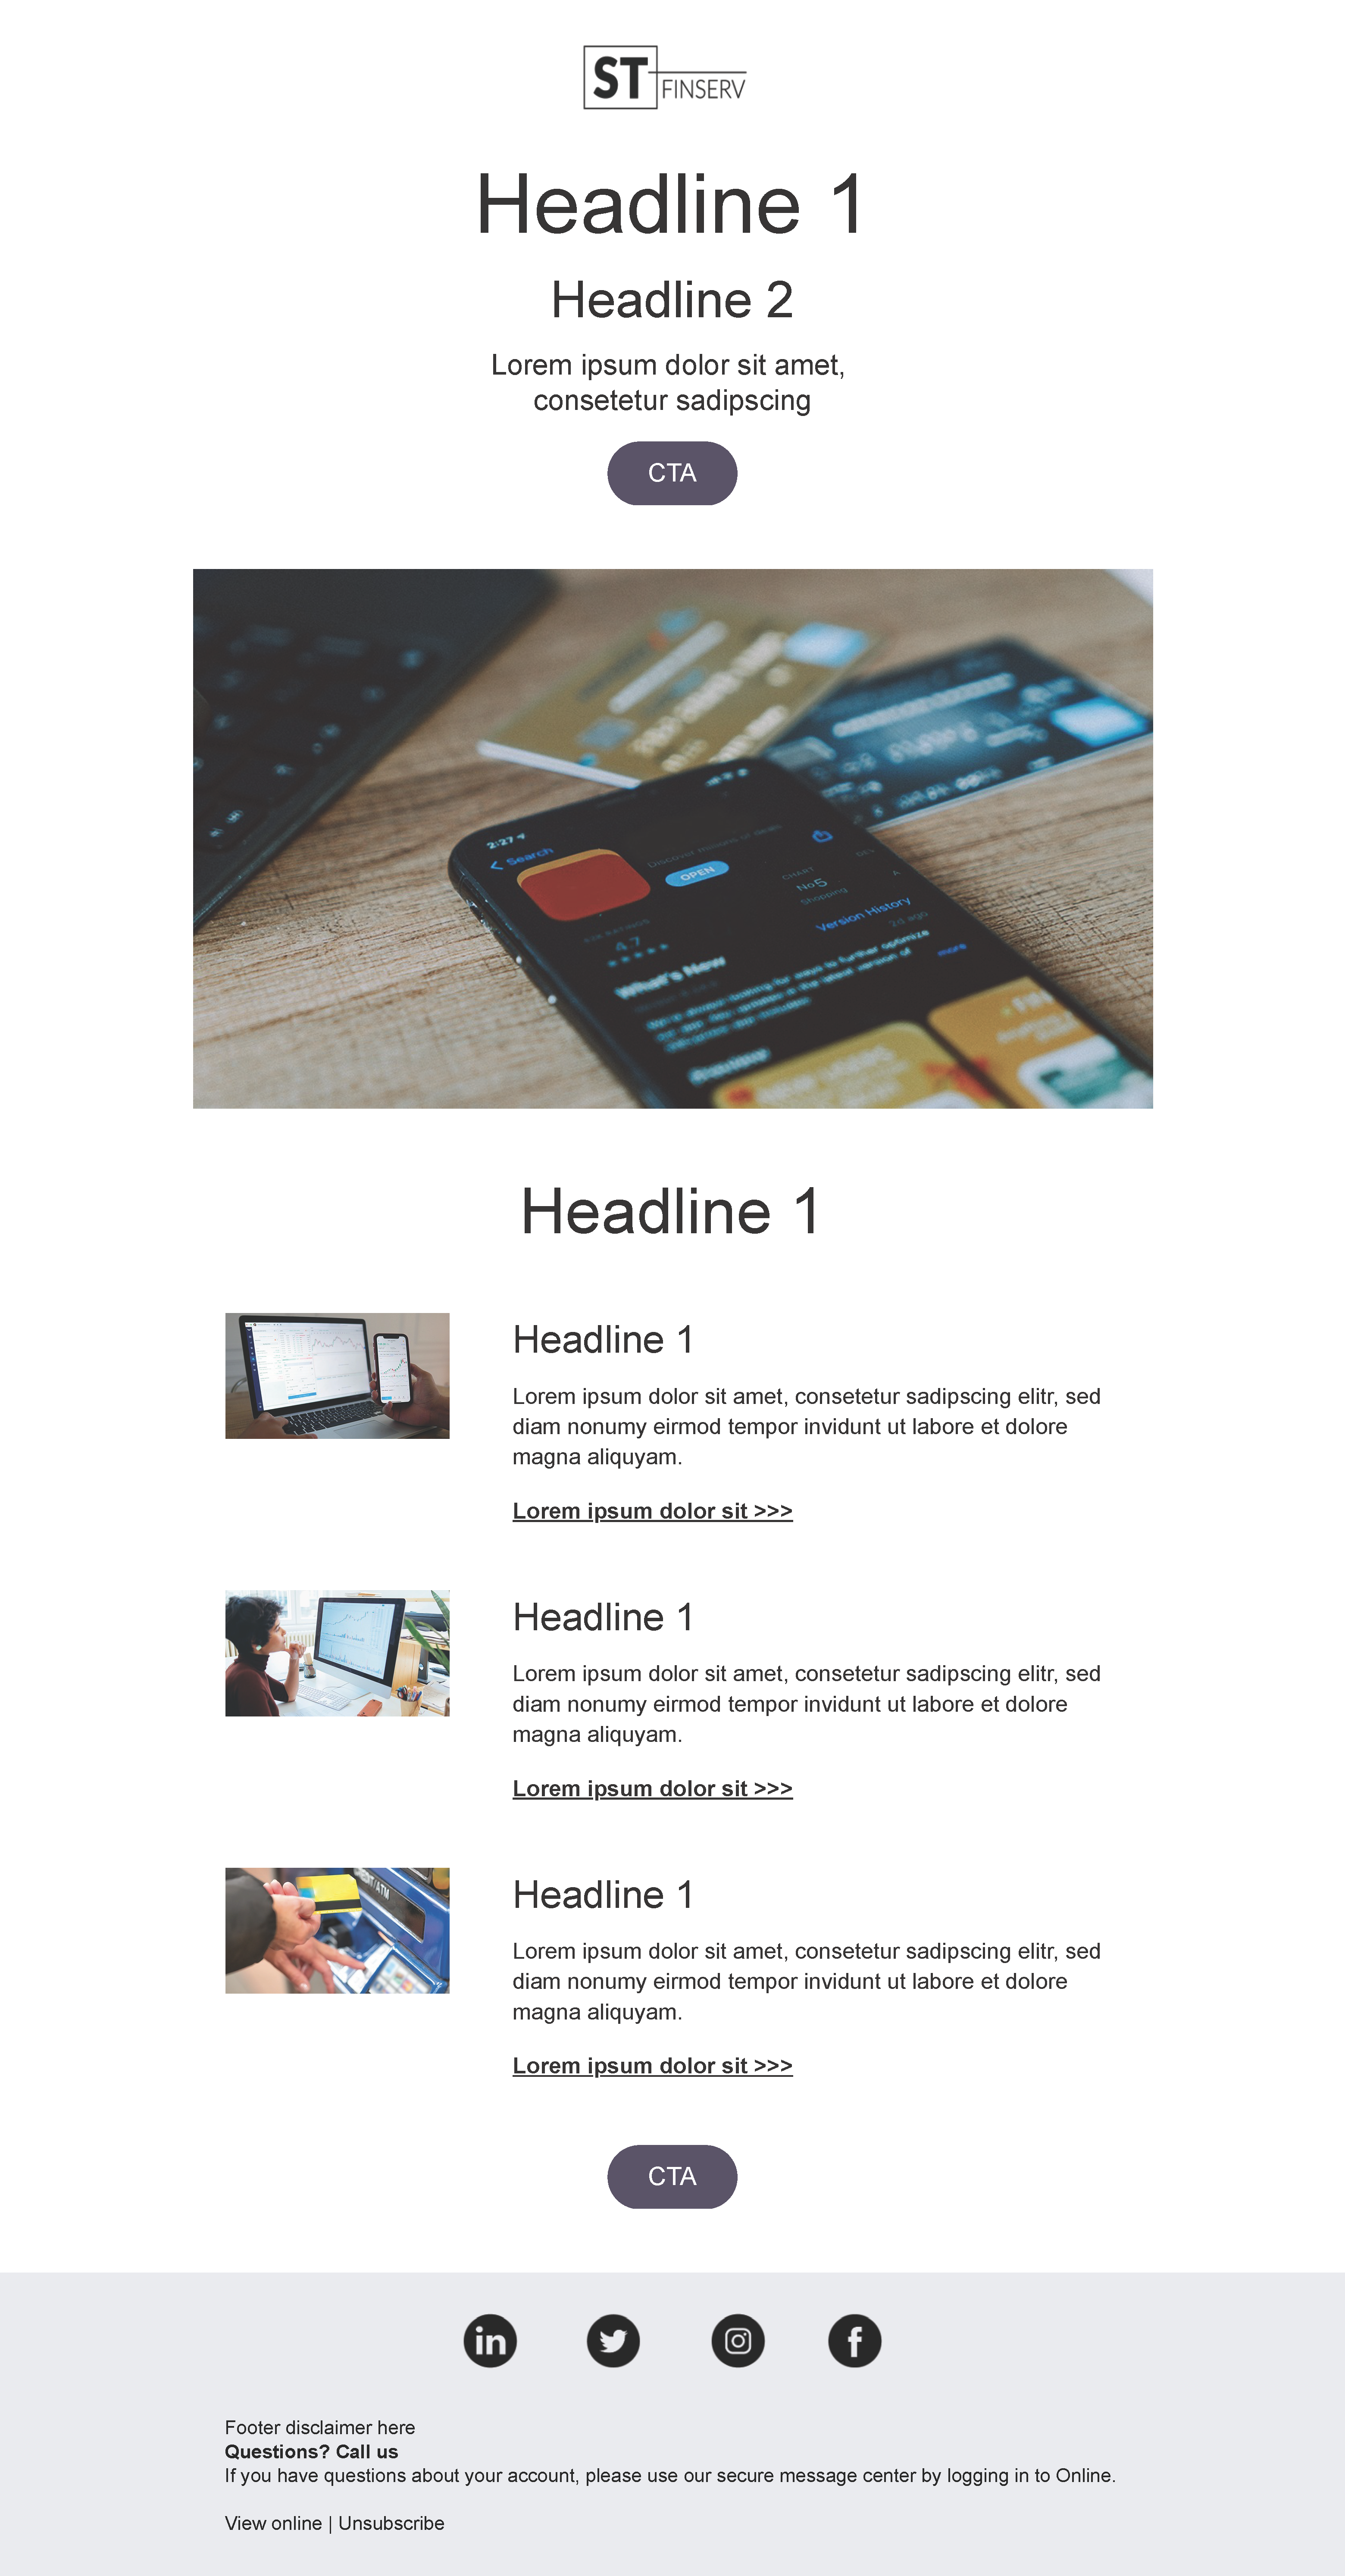 Product Update Email Template 1 for highly regulated industries